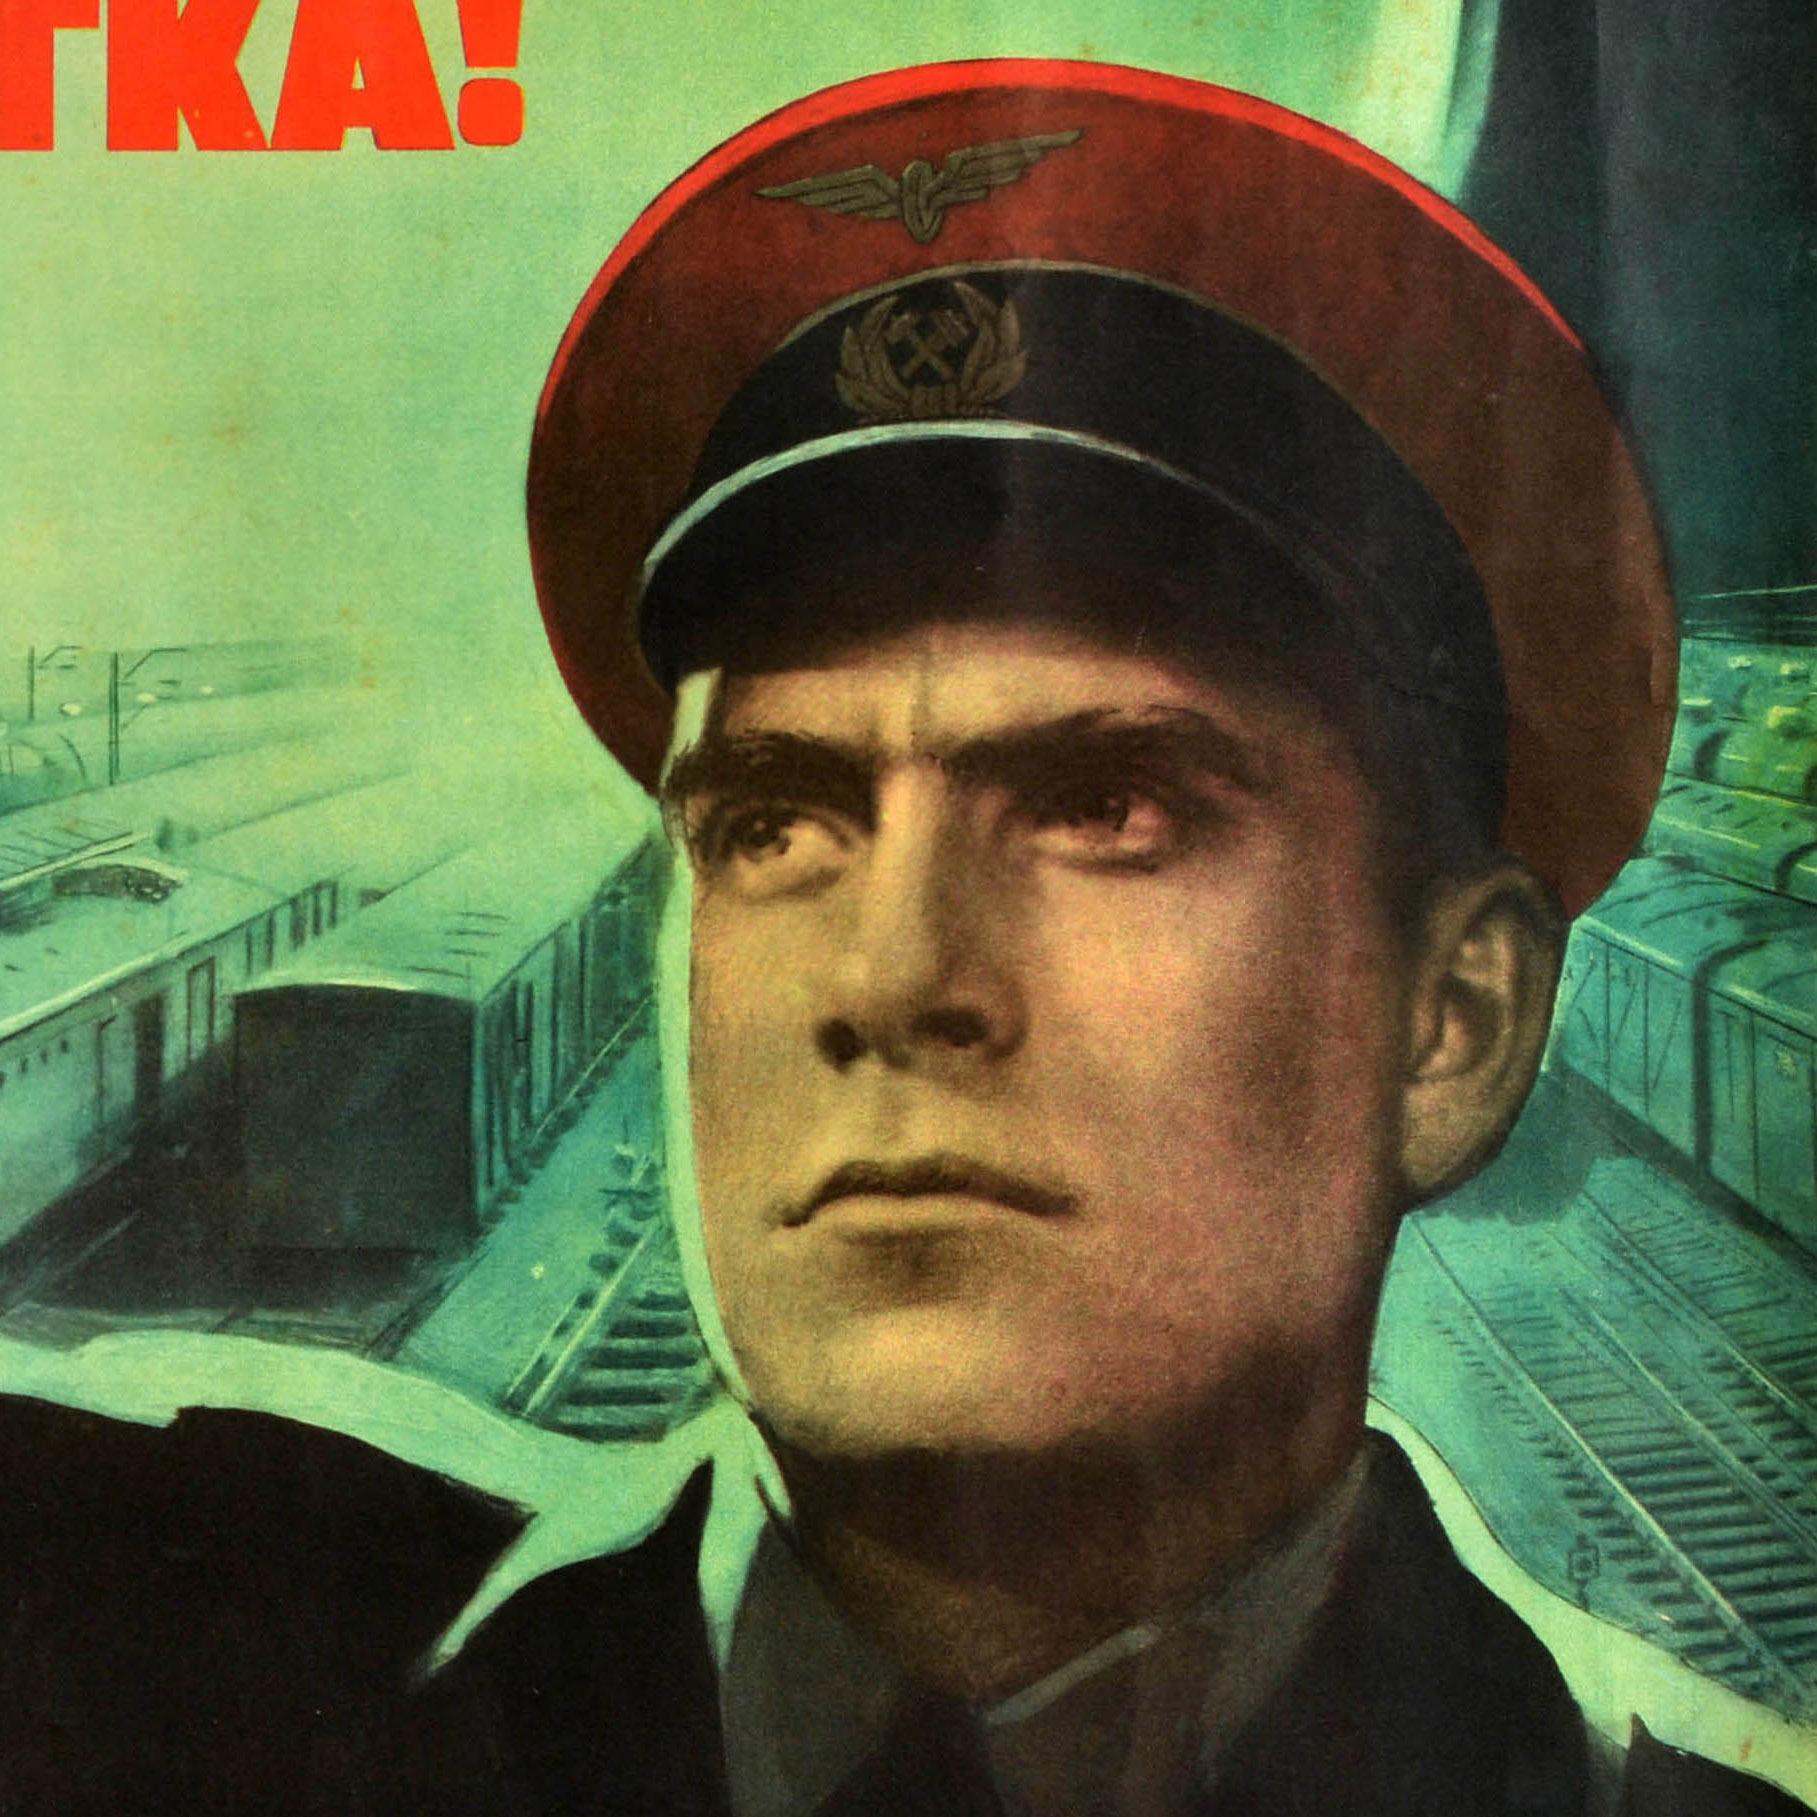 Original vintage Soviet propaganda poster - For you Five Year Plan! - featuring an illustration of a railway worker in uniform holding up a flag in front of freight and cargo trains and a passenger train on the rail tracks with a large green